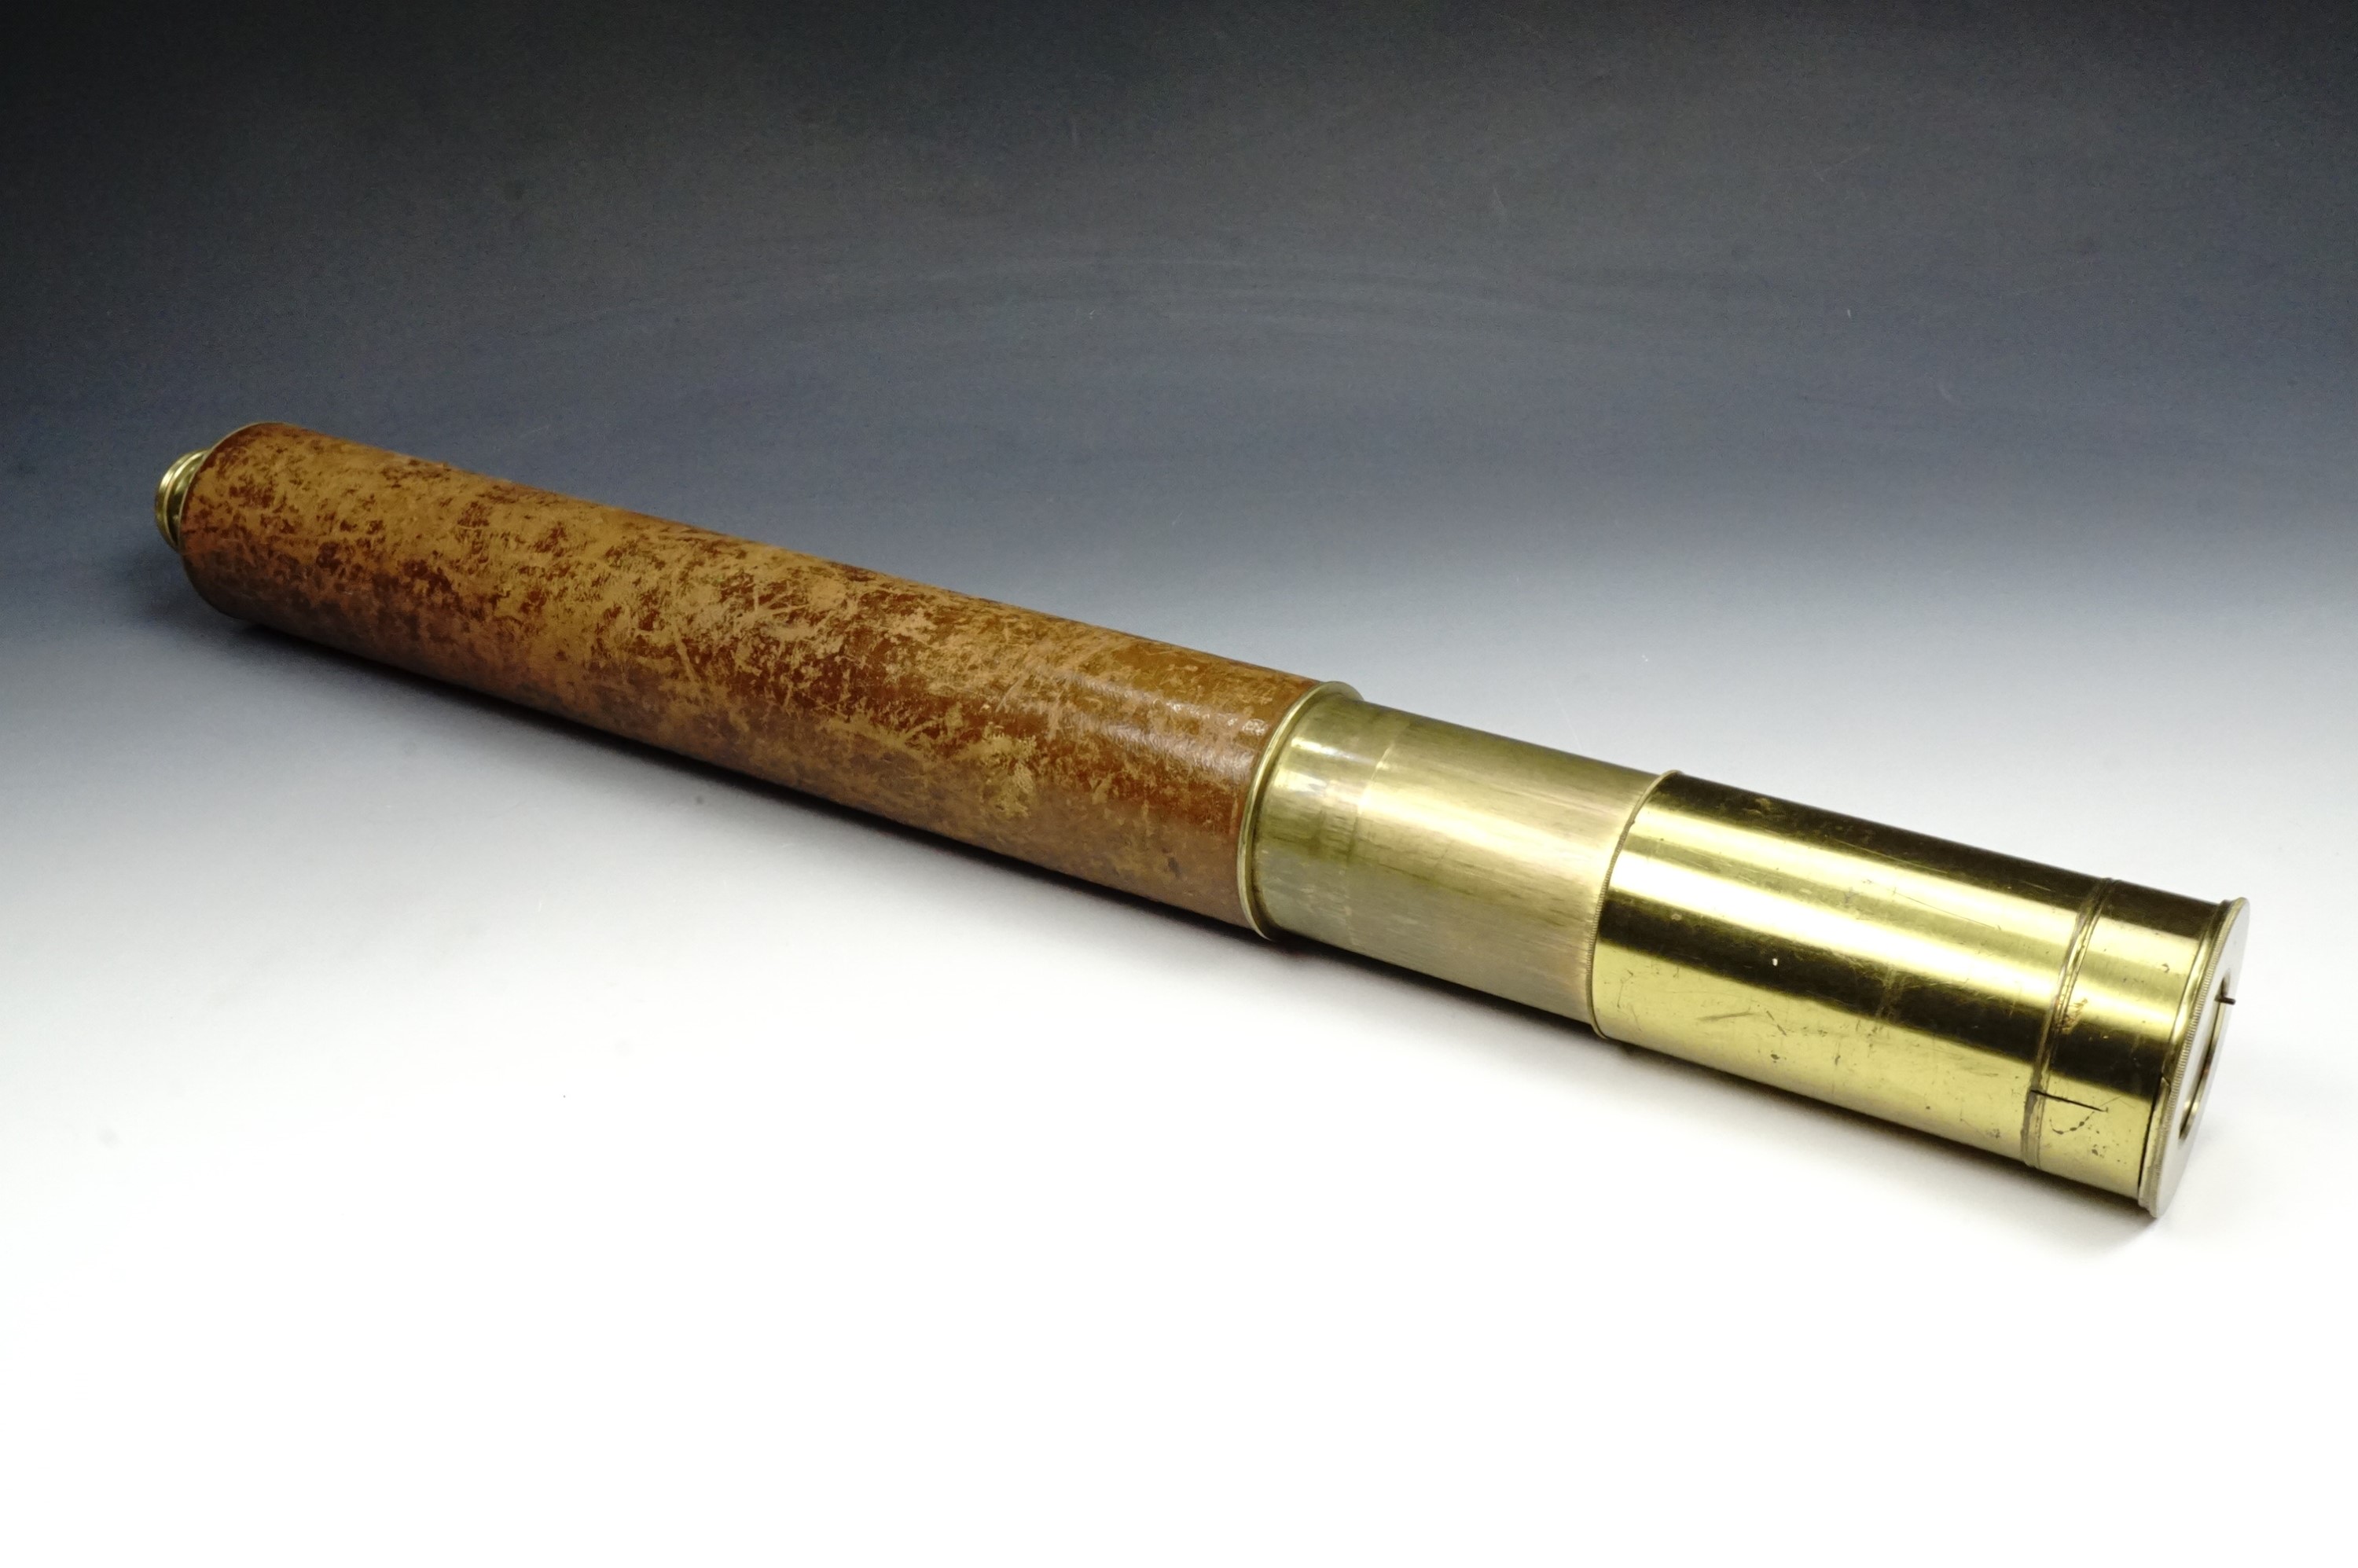 A Victorian Anchor trade mark "Try Me" single draw brass telescope, having a 1 1/2 inch objective, - Image 3 of 4